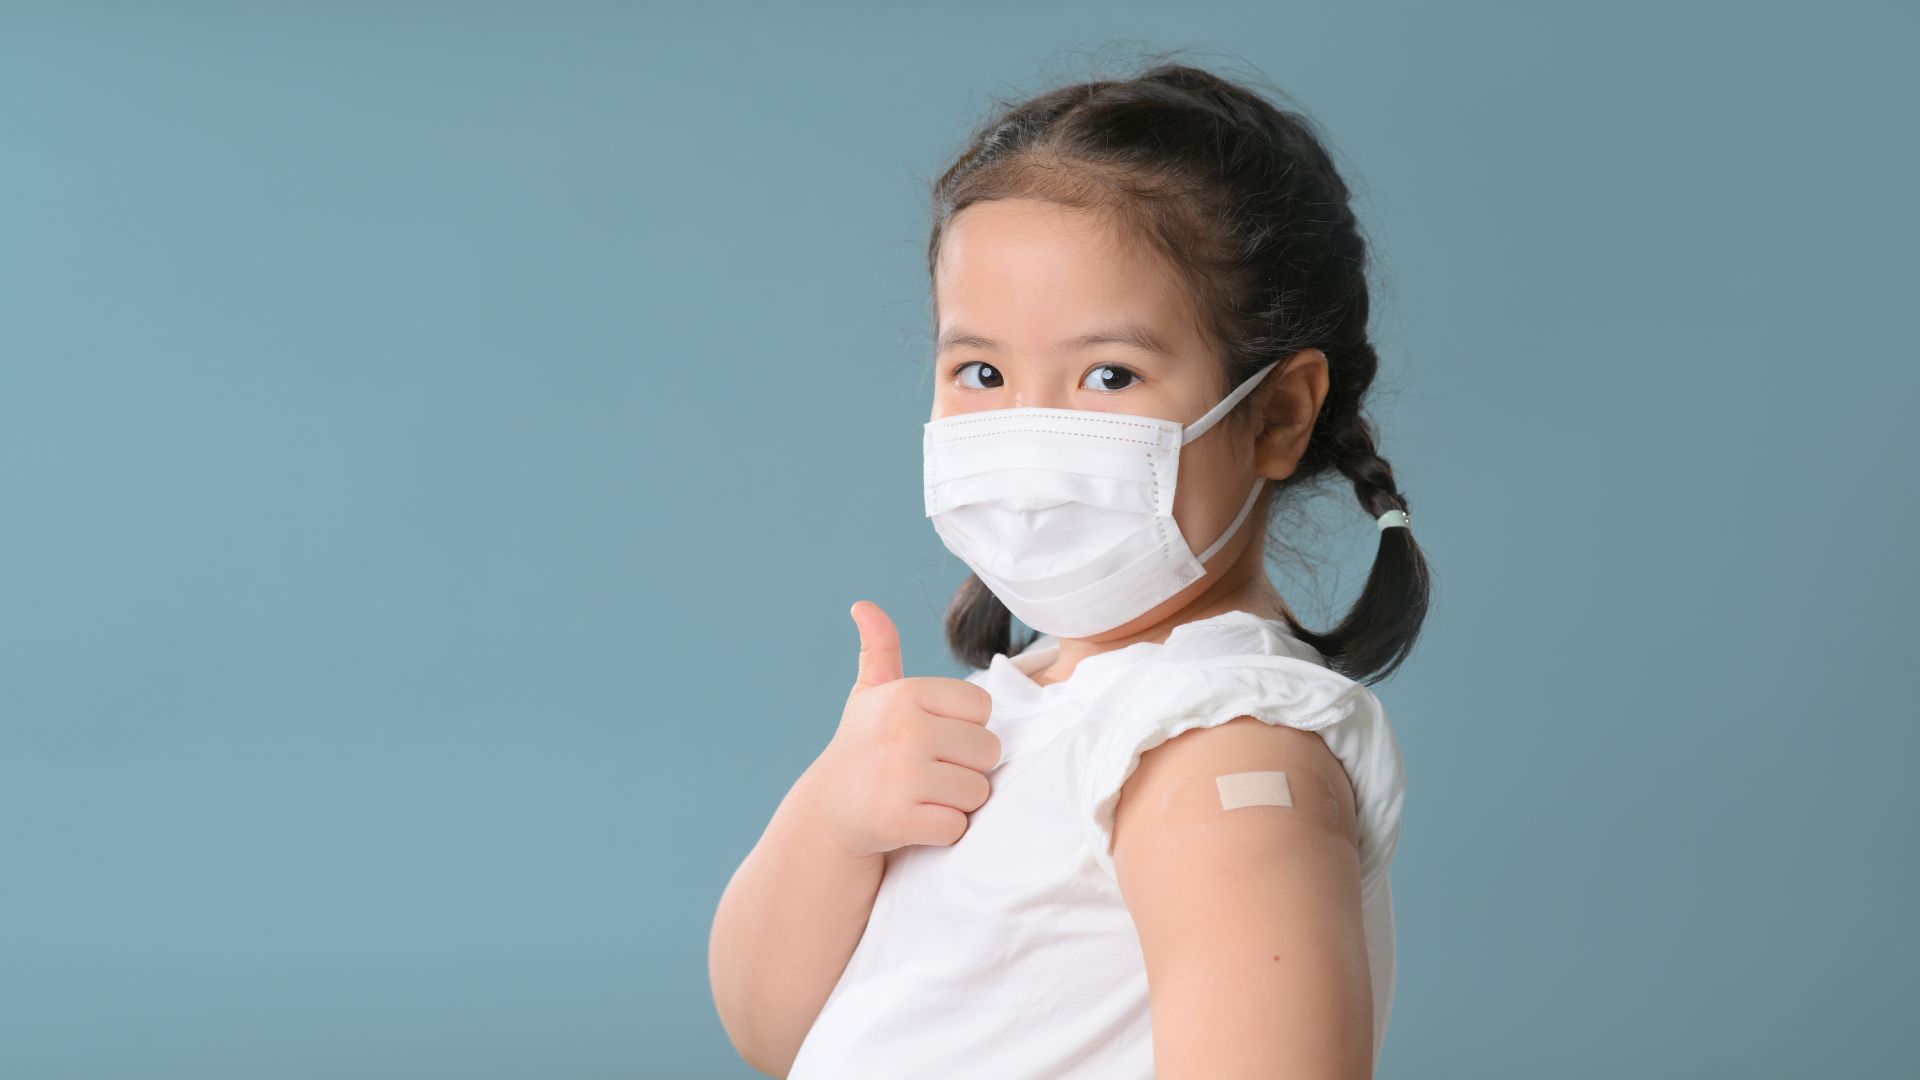 Coronavirus Vaccination Advertisement. Happy Vaccinated Little asian girl Showing Arm With Plaster Bandage After Covid 19 Vaccine Injection Posing Over Blue Background, Smiling To Camera. New normal.Covid 19 coronavirus., Blank Space